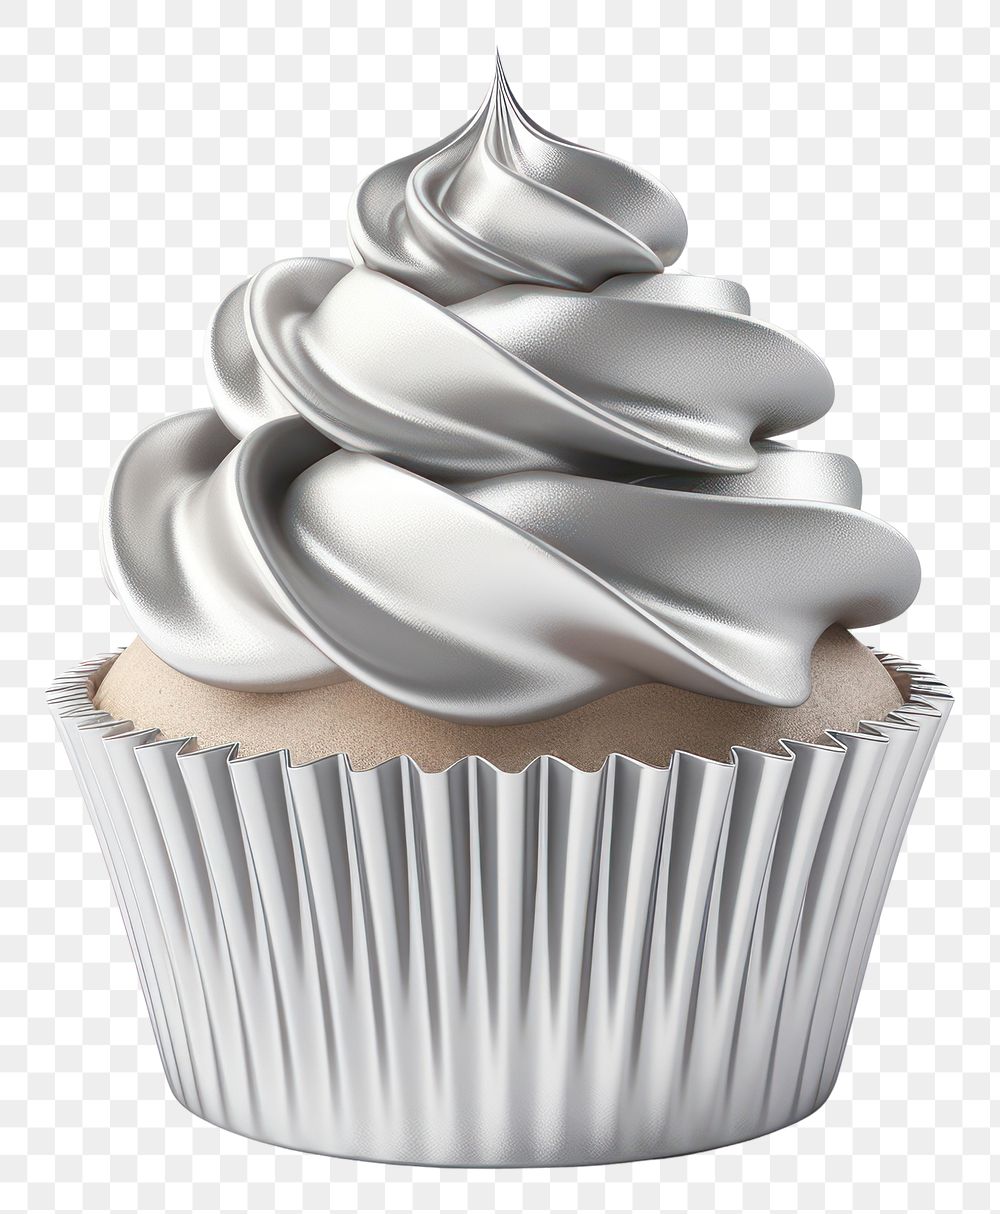 PNG Cupcake Chrome material dessert silver icing.